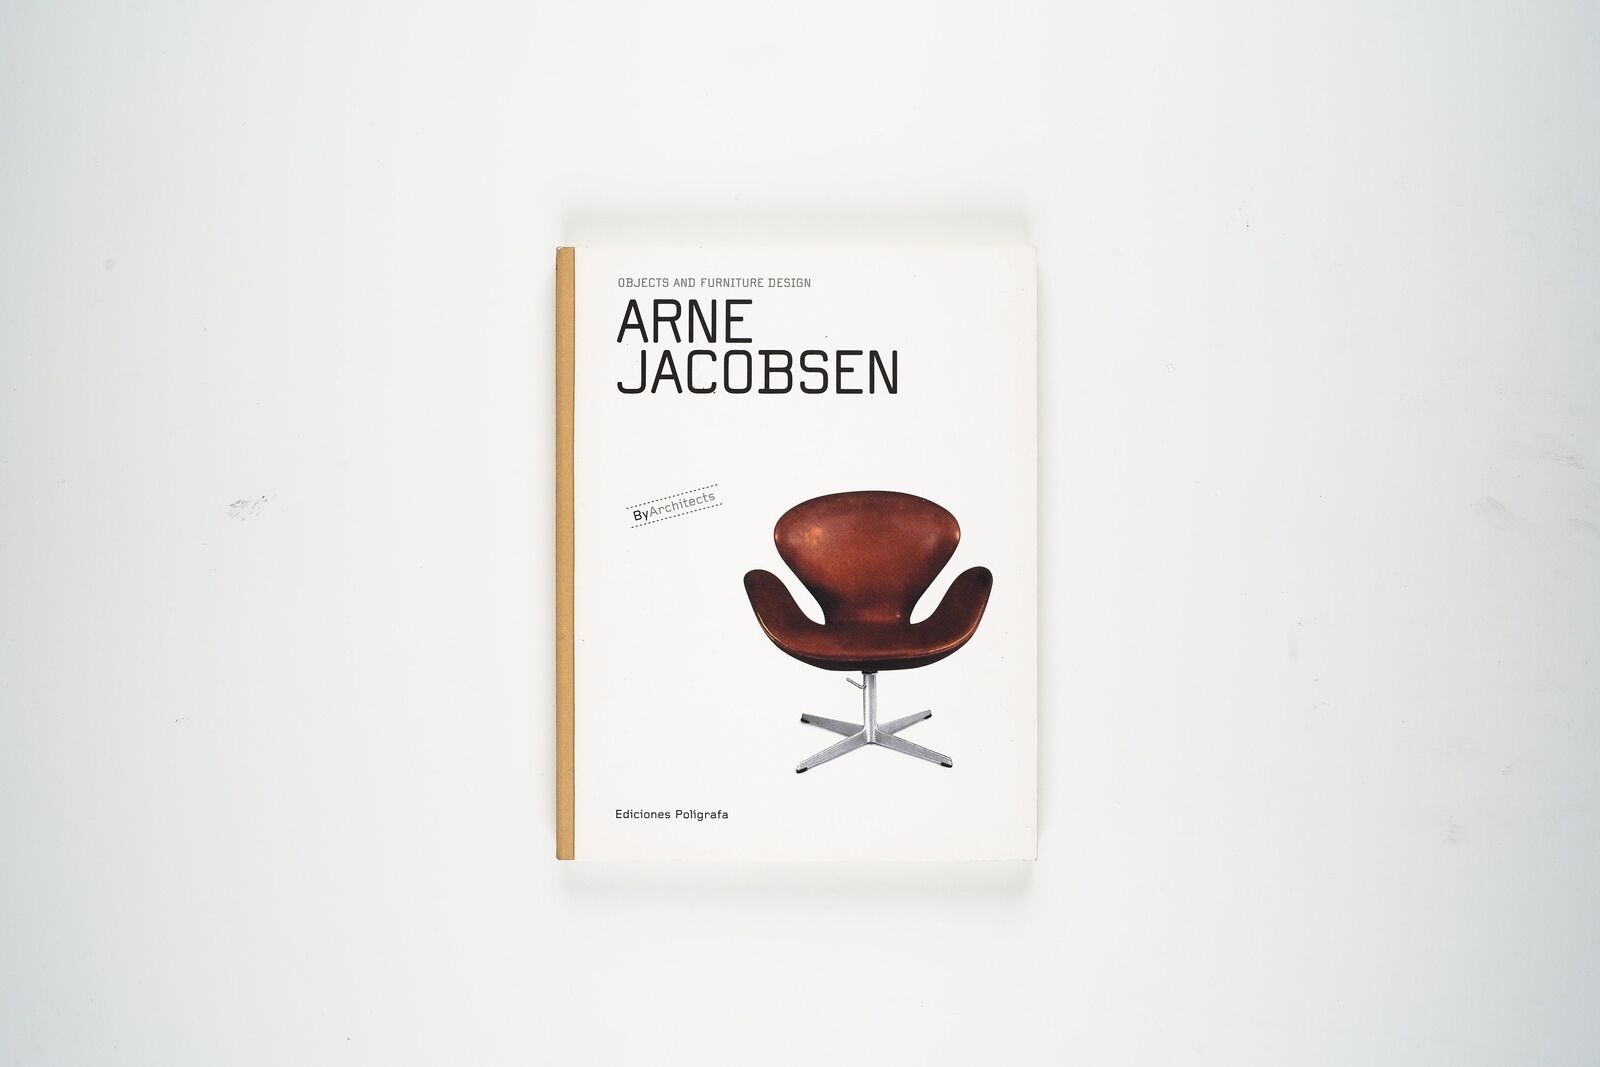 Arne Jacobsen: Objects and Furniture Design by Arne Jacobsen